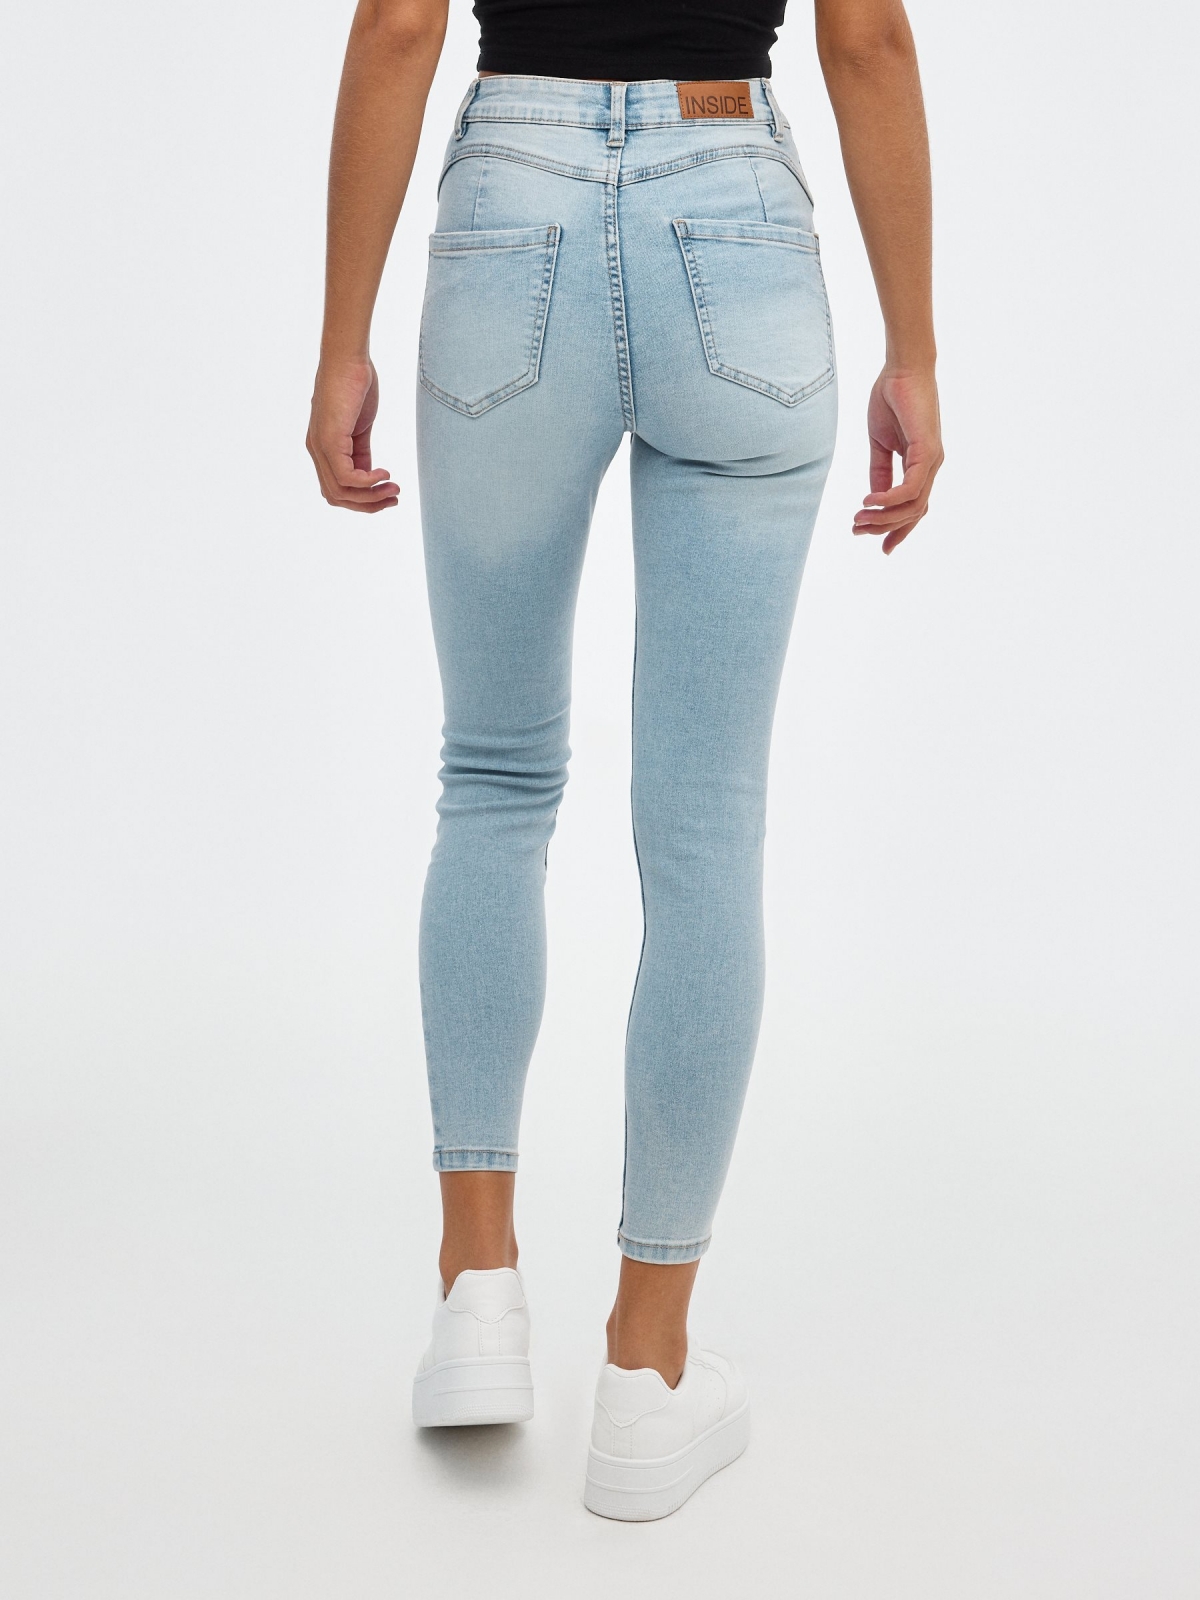 Skinny jeans mid rise push up light blue middle back view